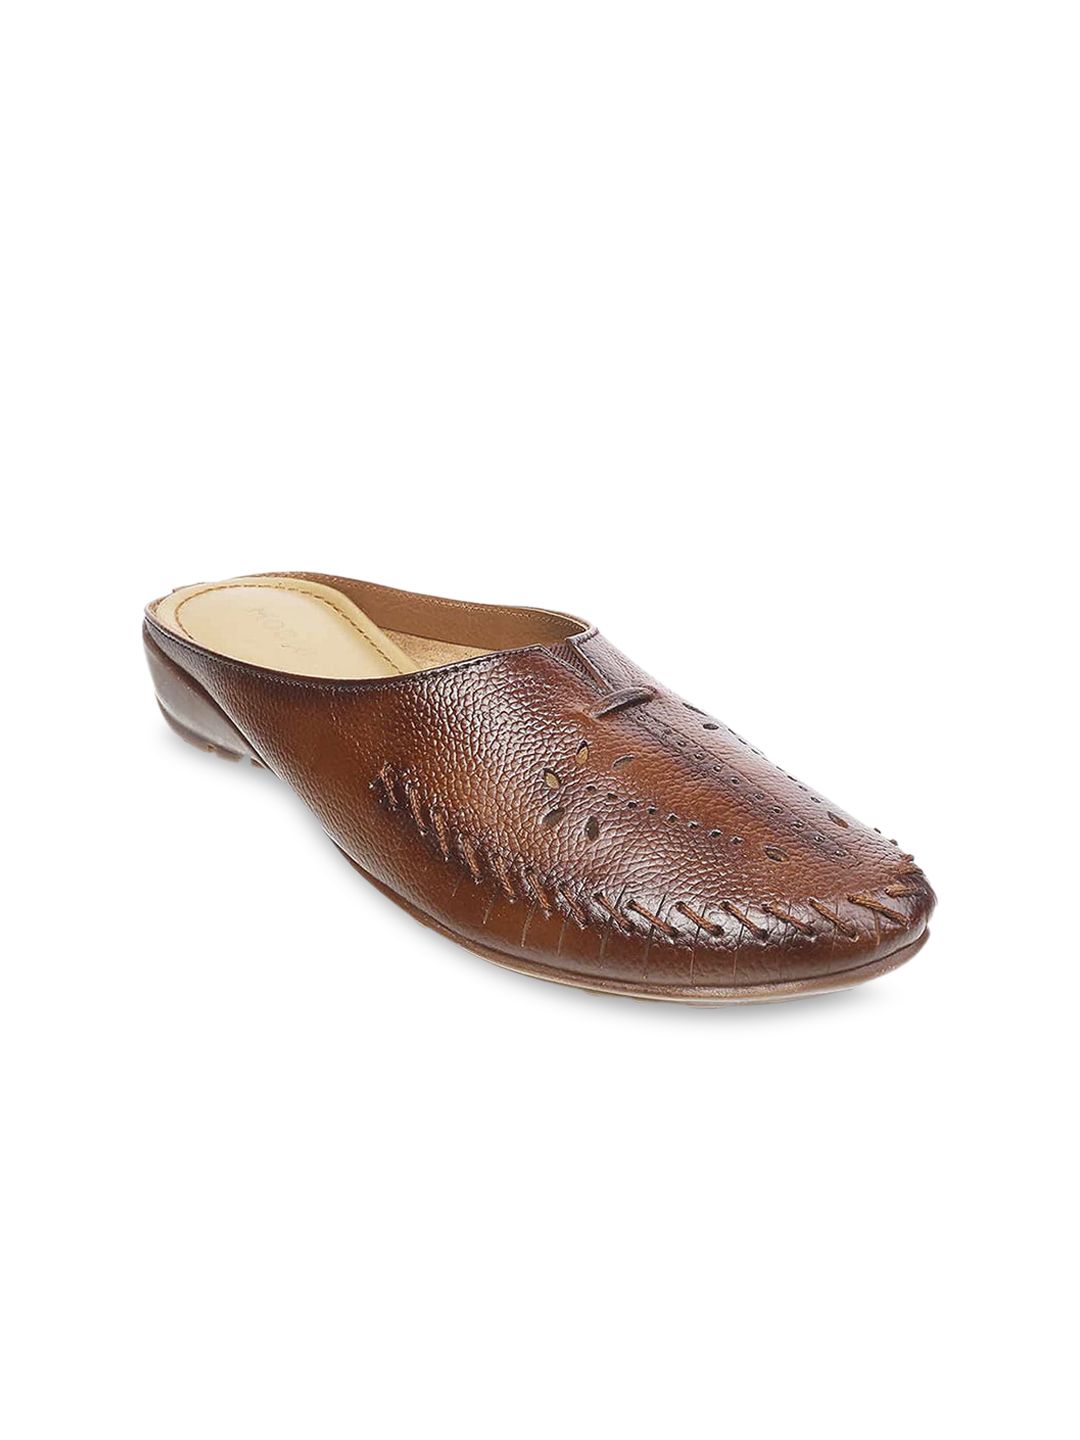 Mochi Women Tan Mules with Laser Cuts Flats Price in India